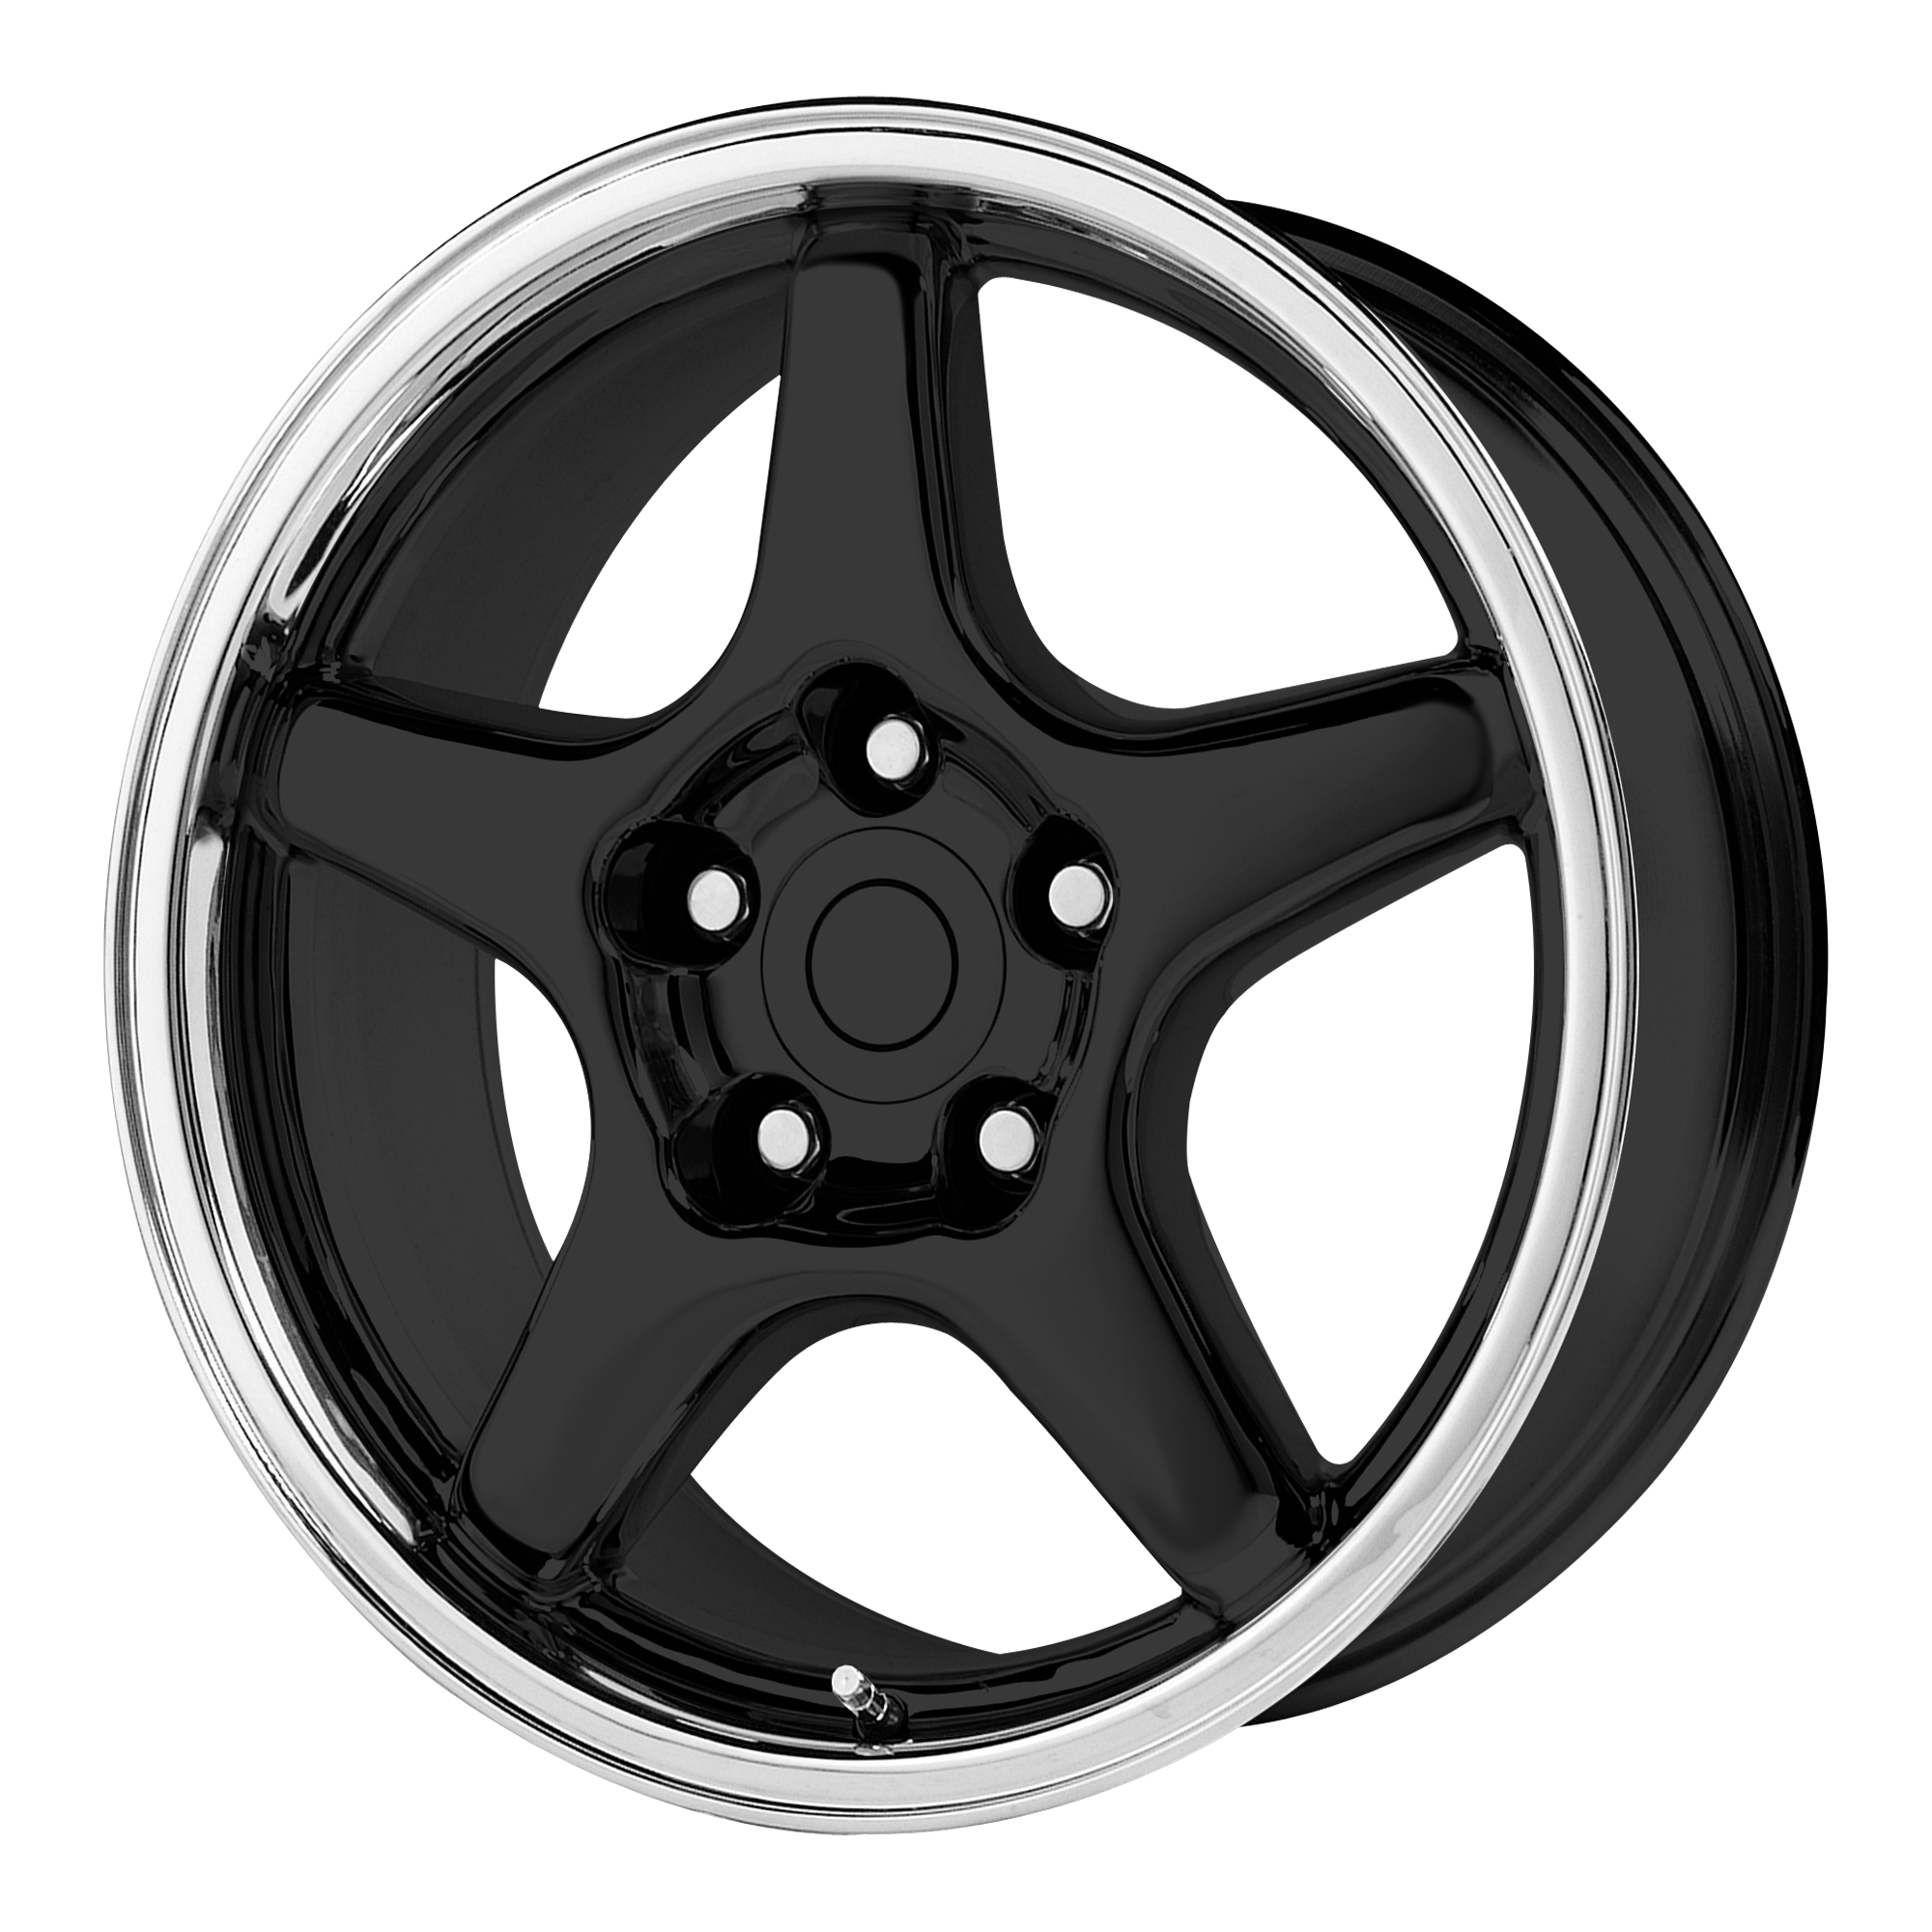 103C 17x9.5 5x120.65 GLOSS BLACK W/ MACHINED LIP (38 mm) - Tires and Engine Performance